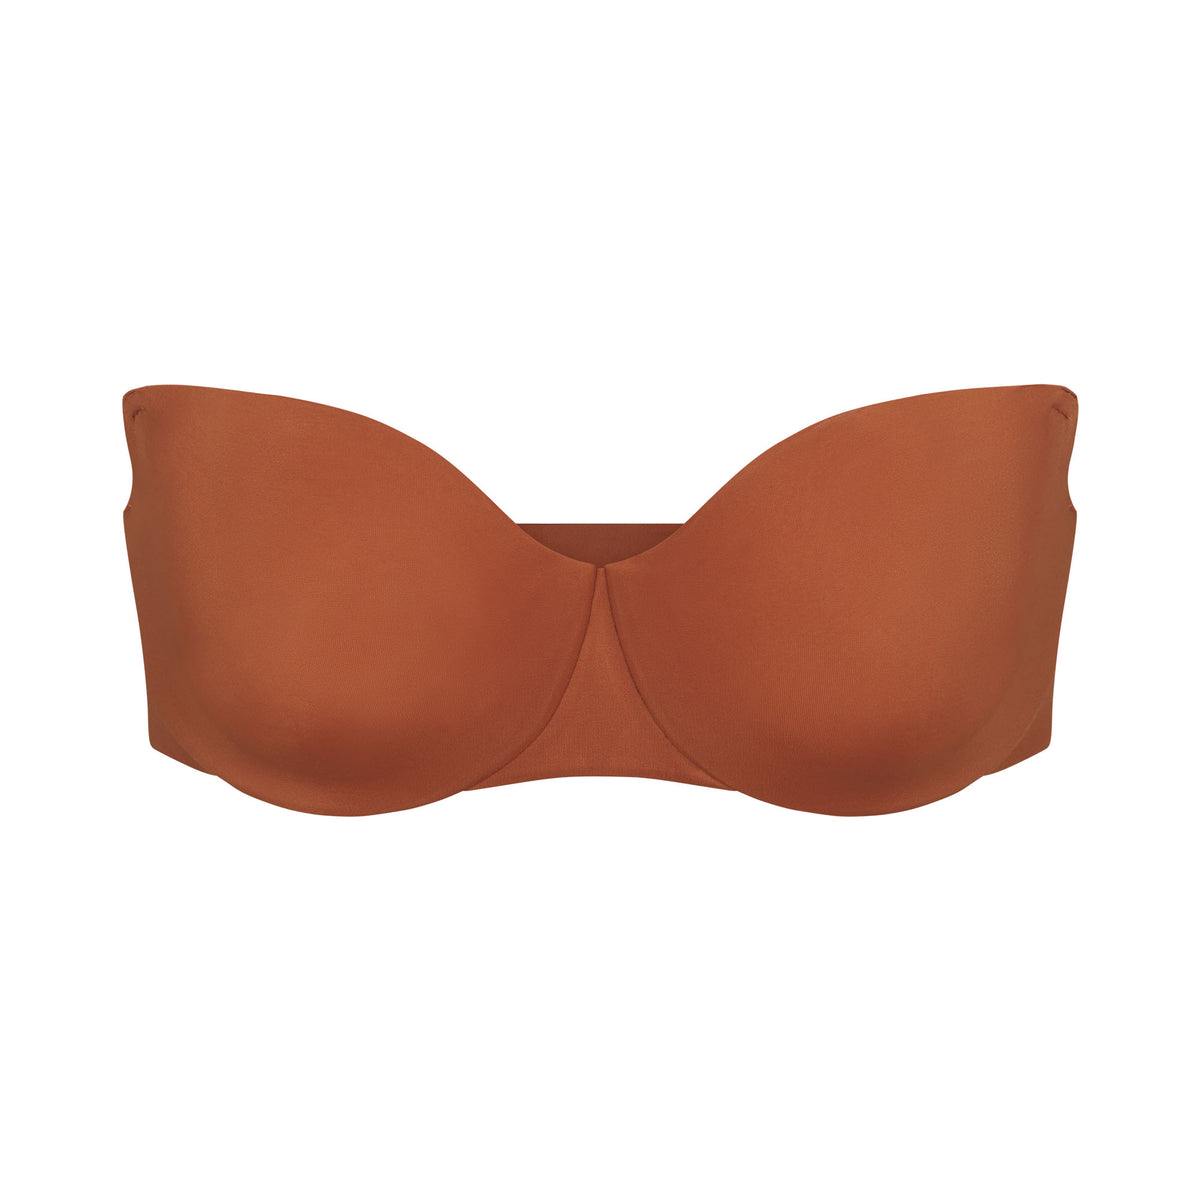 SKIMS Has Finally Restocked Three Of It's Game-Changing Bra Collections